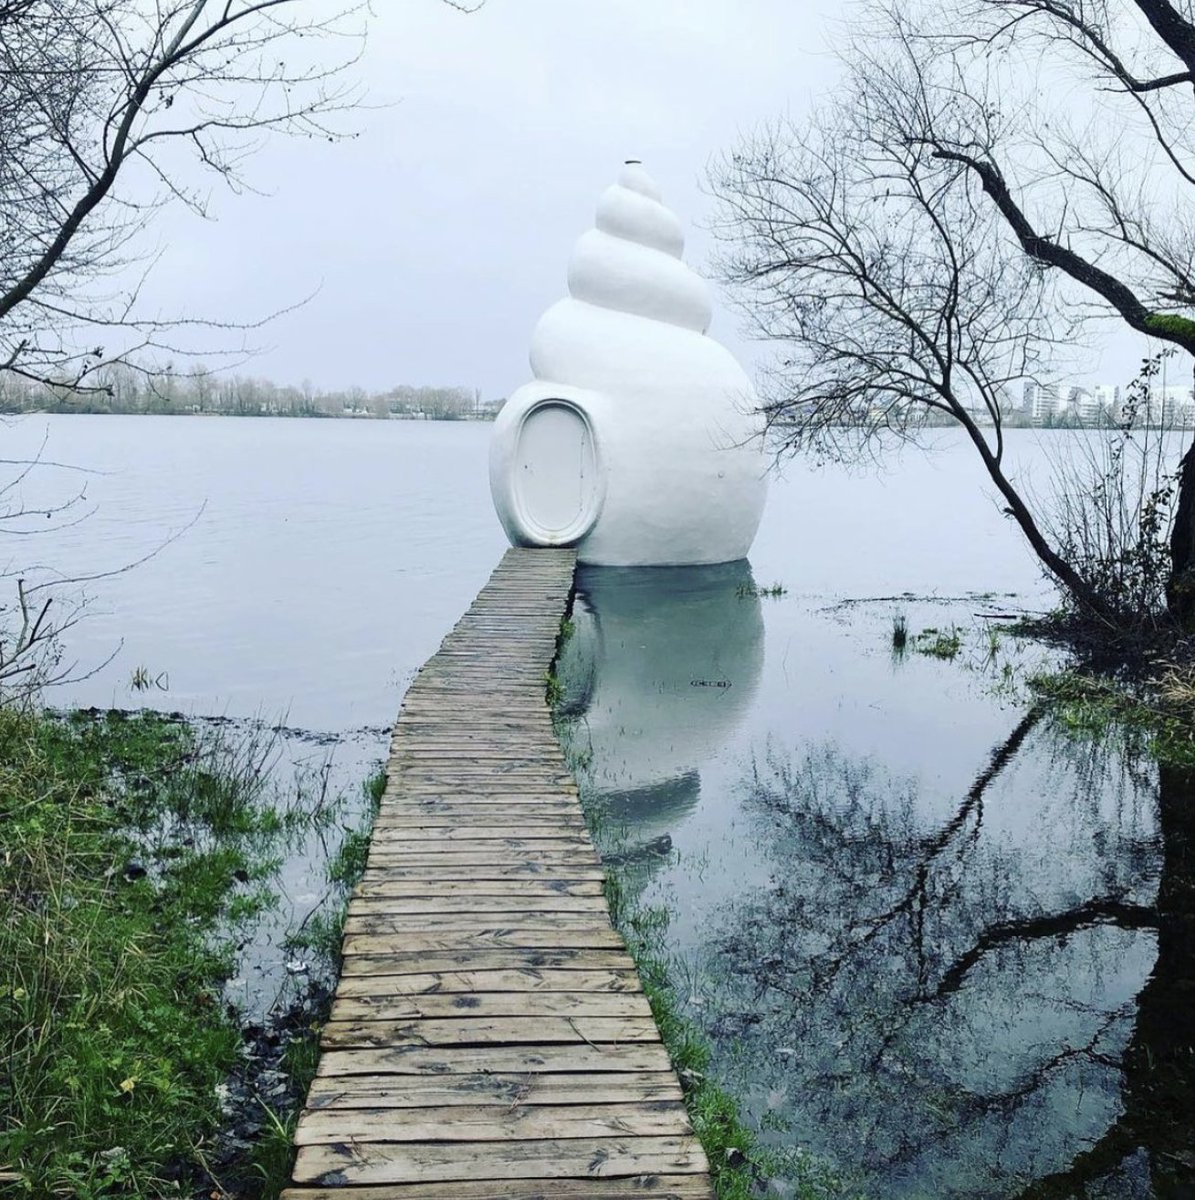 The stunning Neptunea shelter is located on the edge of a secret cove at Lac de Bordeaux Bruges In our imaginations, it connects 2 worlds: the opaque animal shell hints at a life beyond that can’t be seen & this ambiguous relationship between a protective shell & a fragile mass